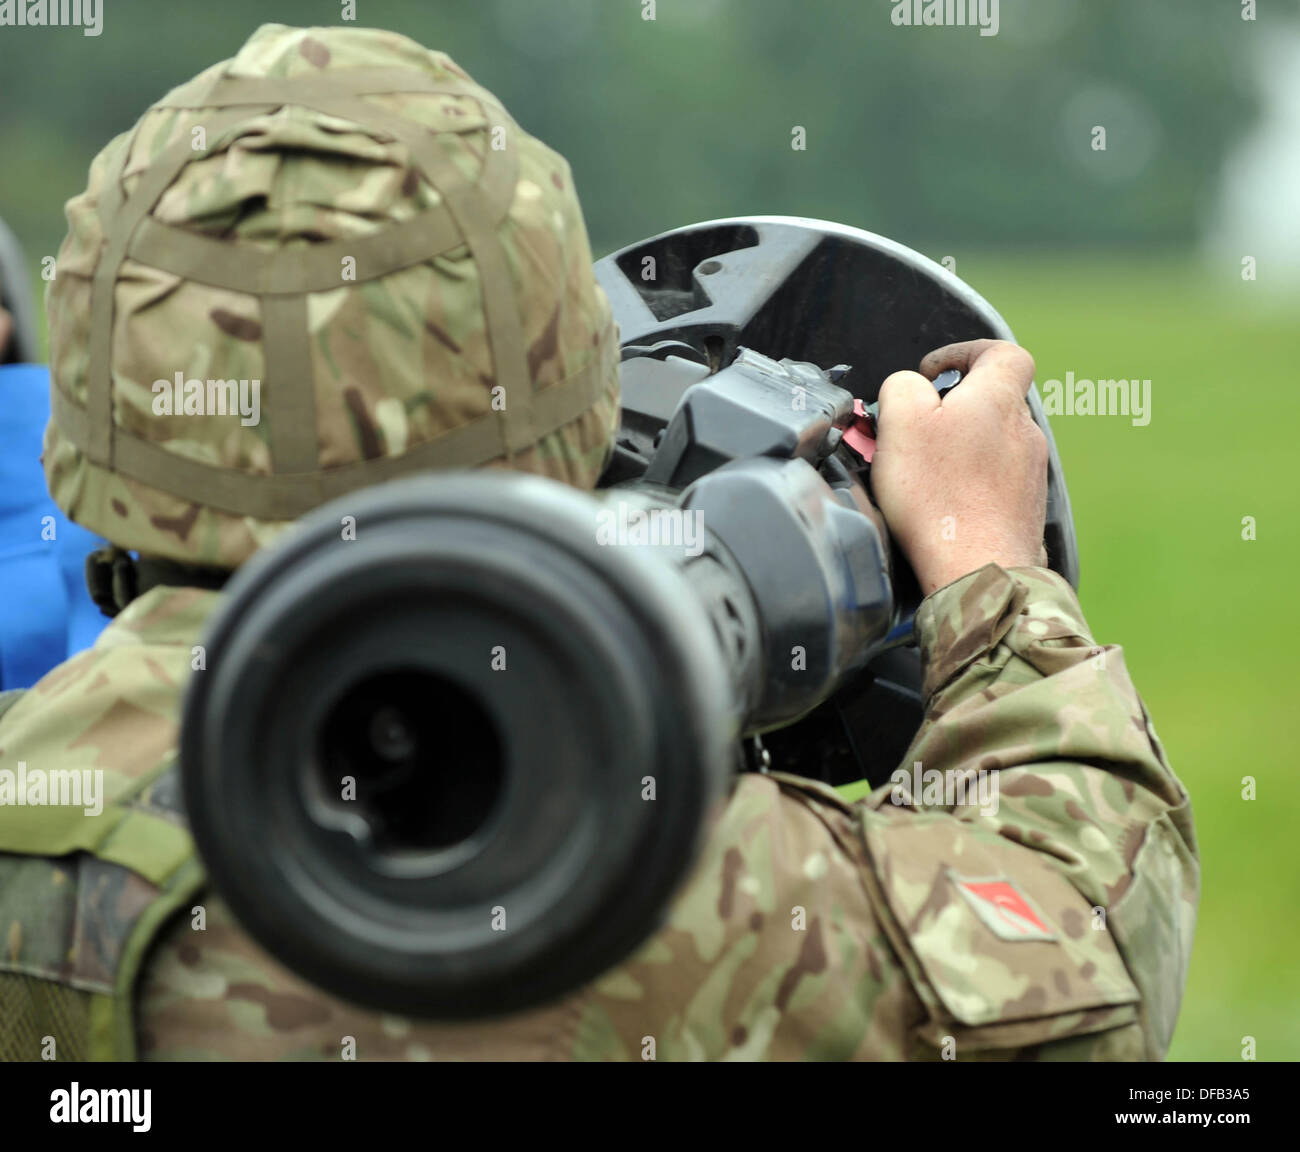 MBT Law laser training weapon being fired. UK Stock Photo